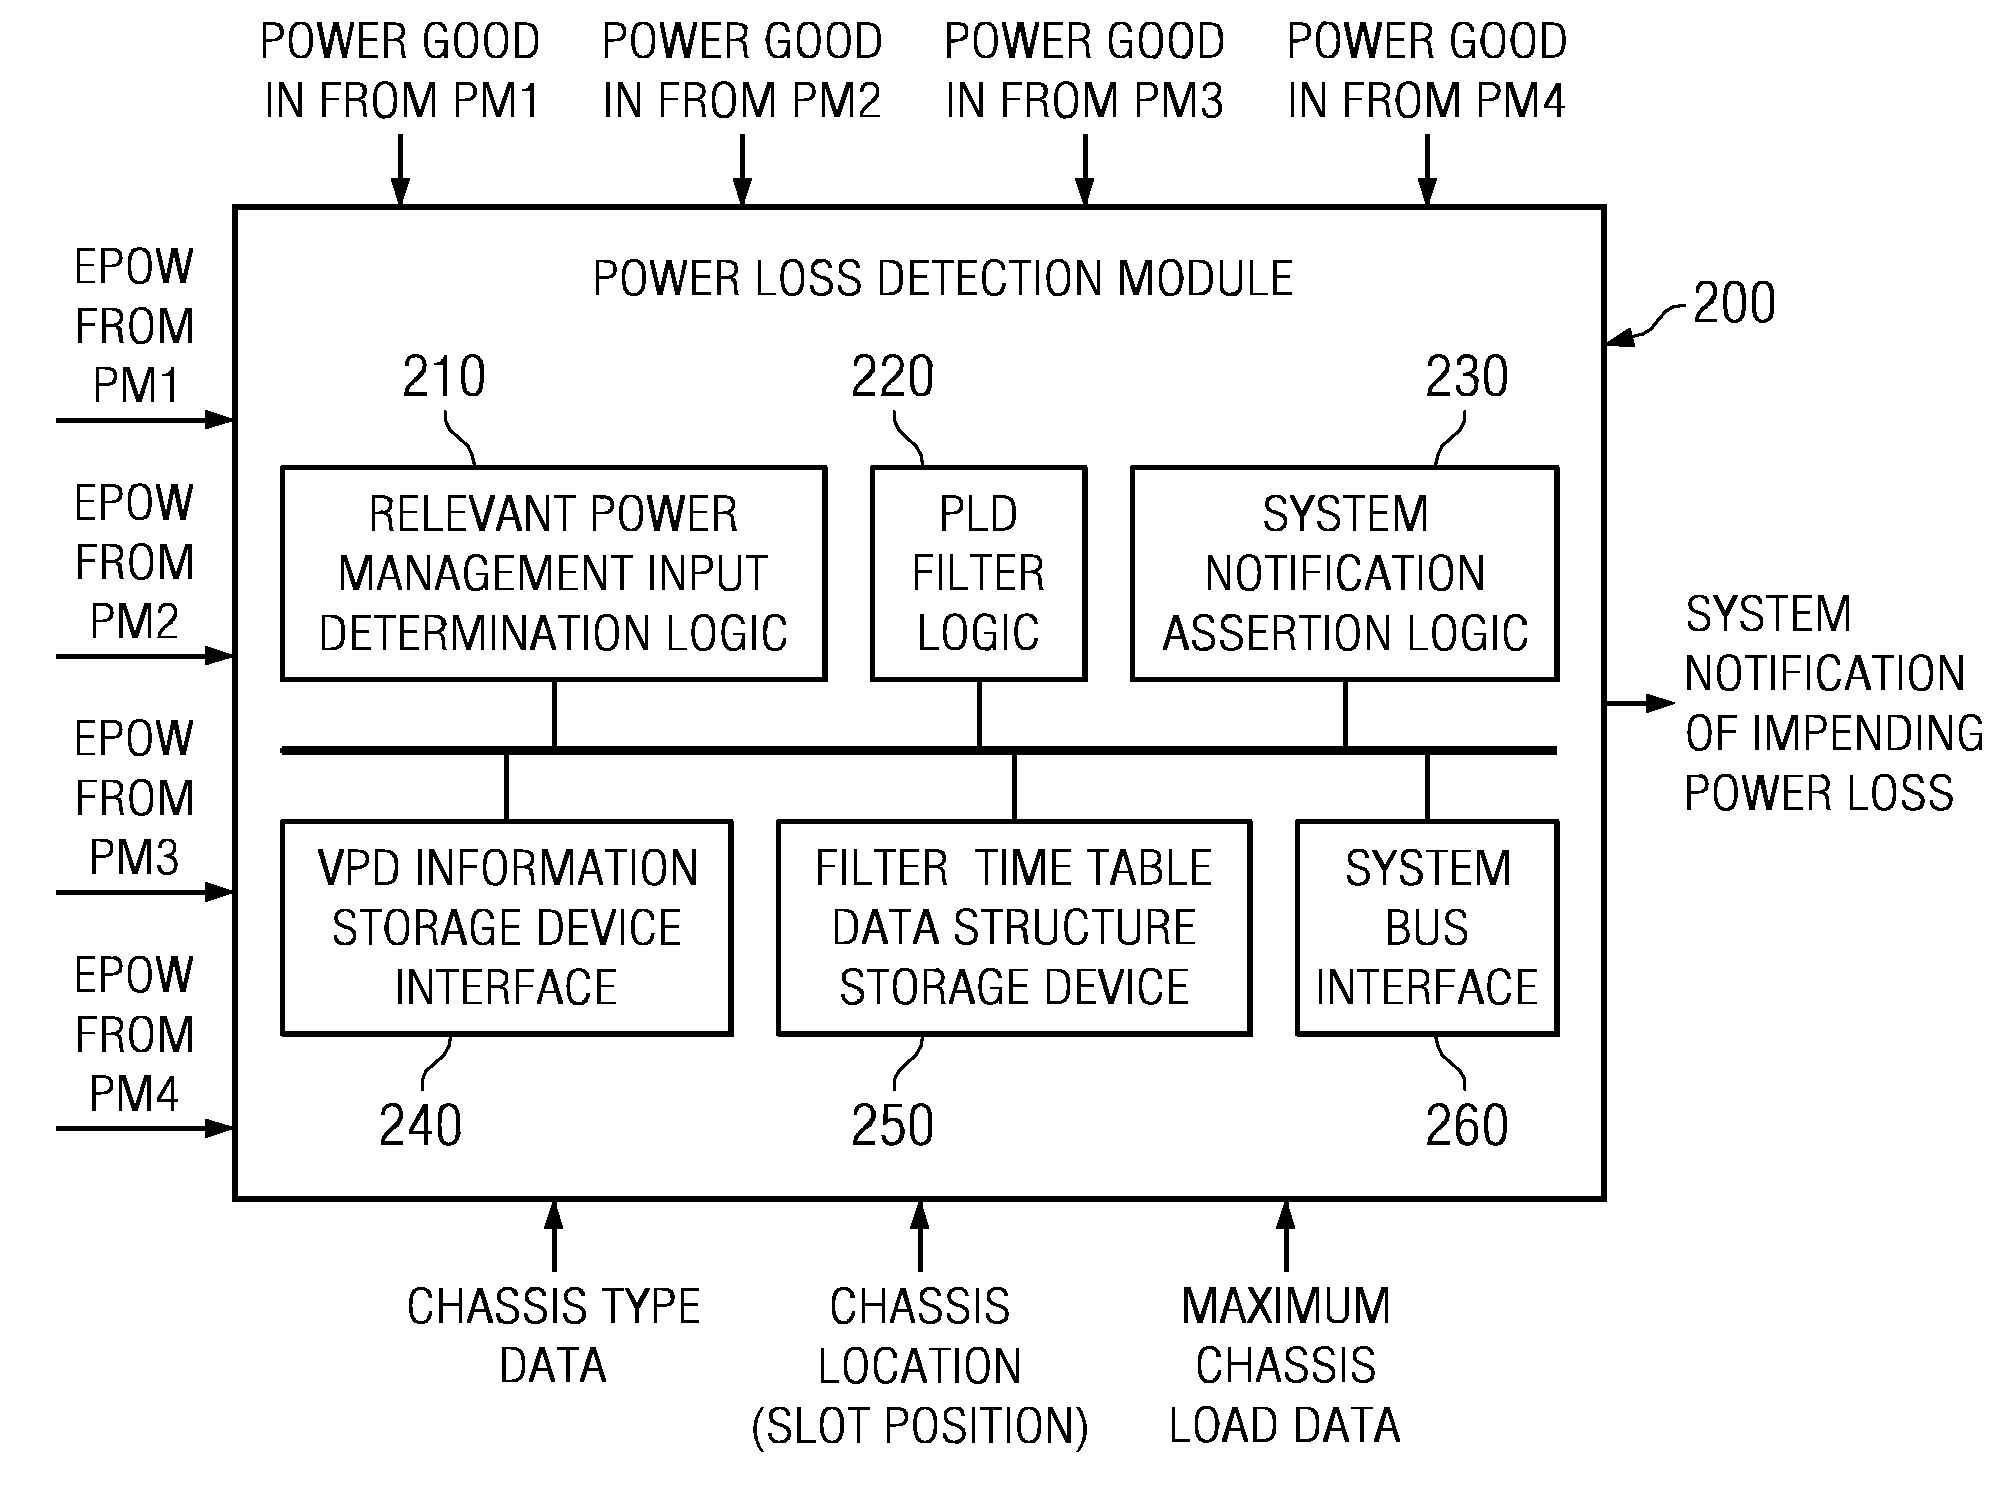 System and Method for Thresholding System Power Loss Notifications in a Data Processing System Based on Vital Product Data